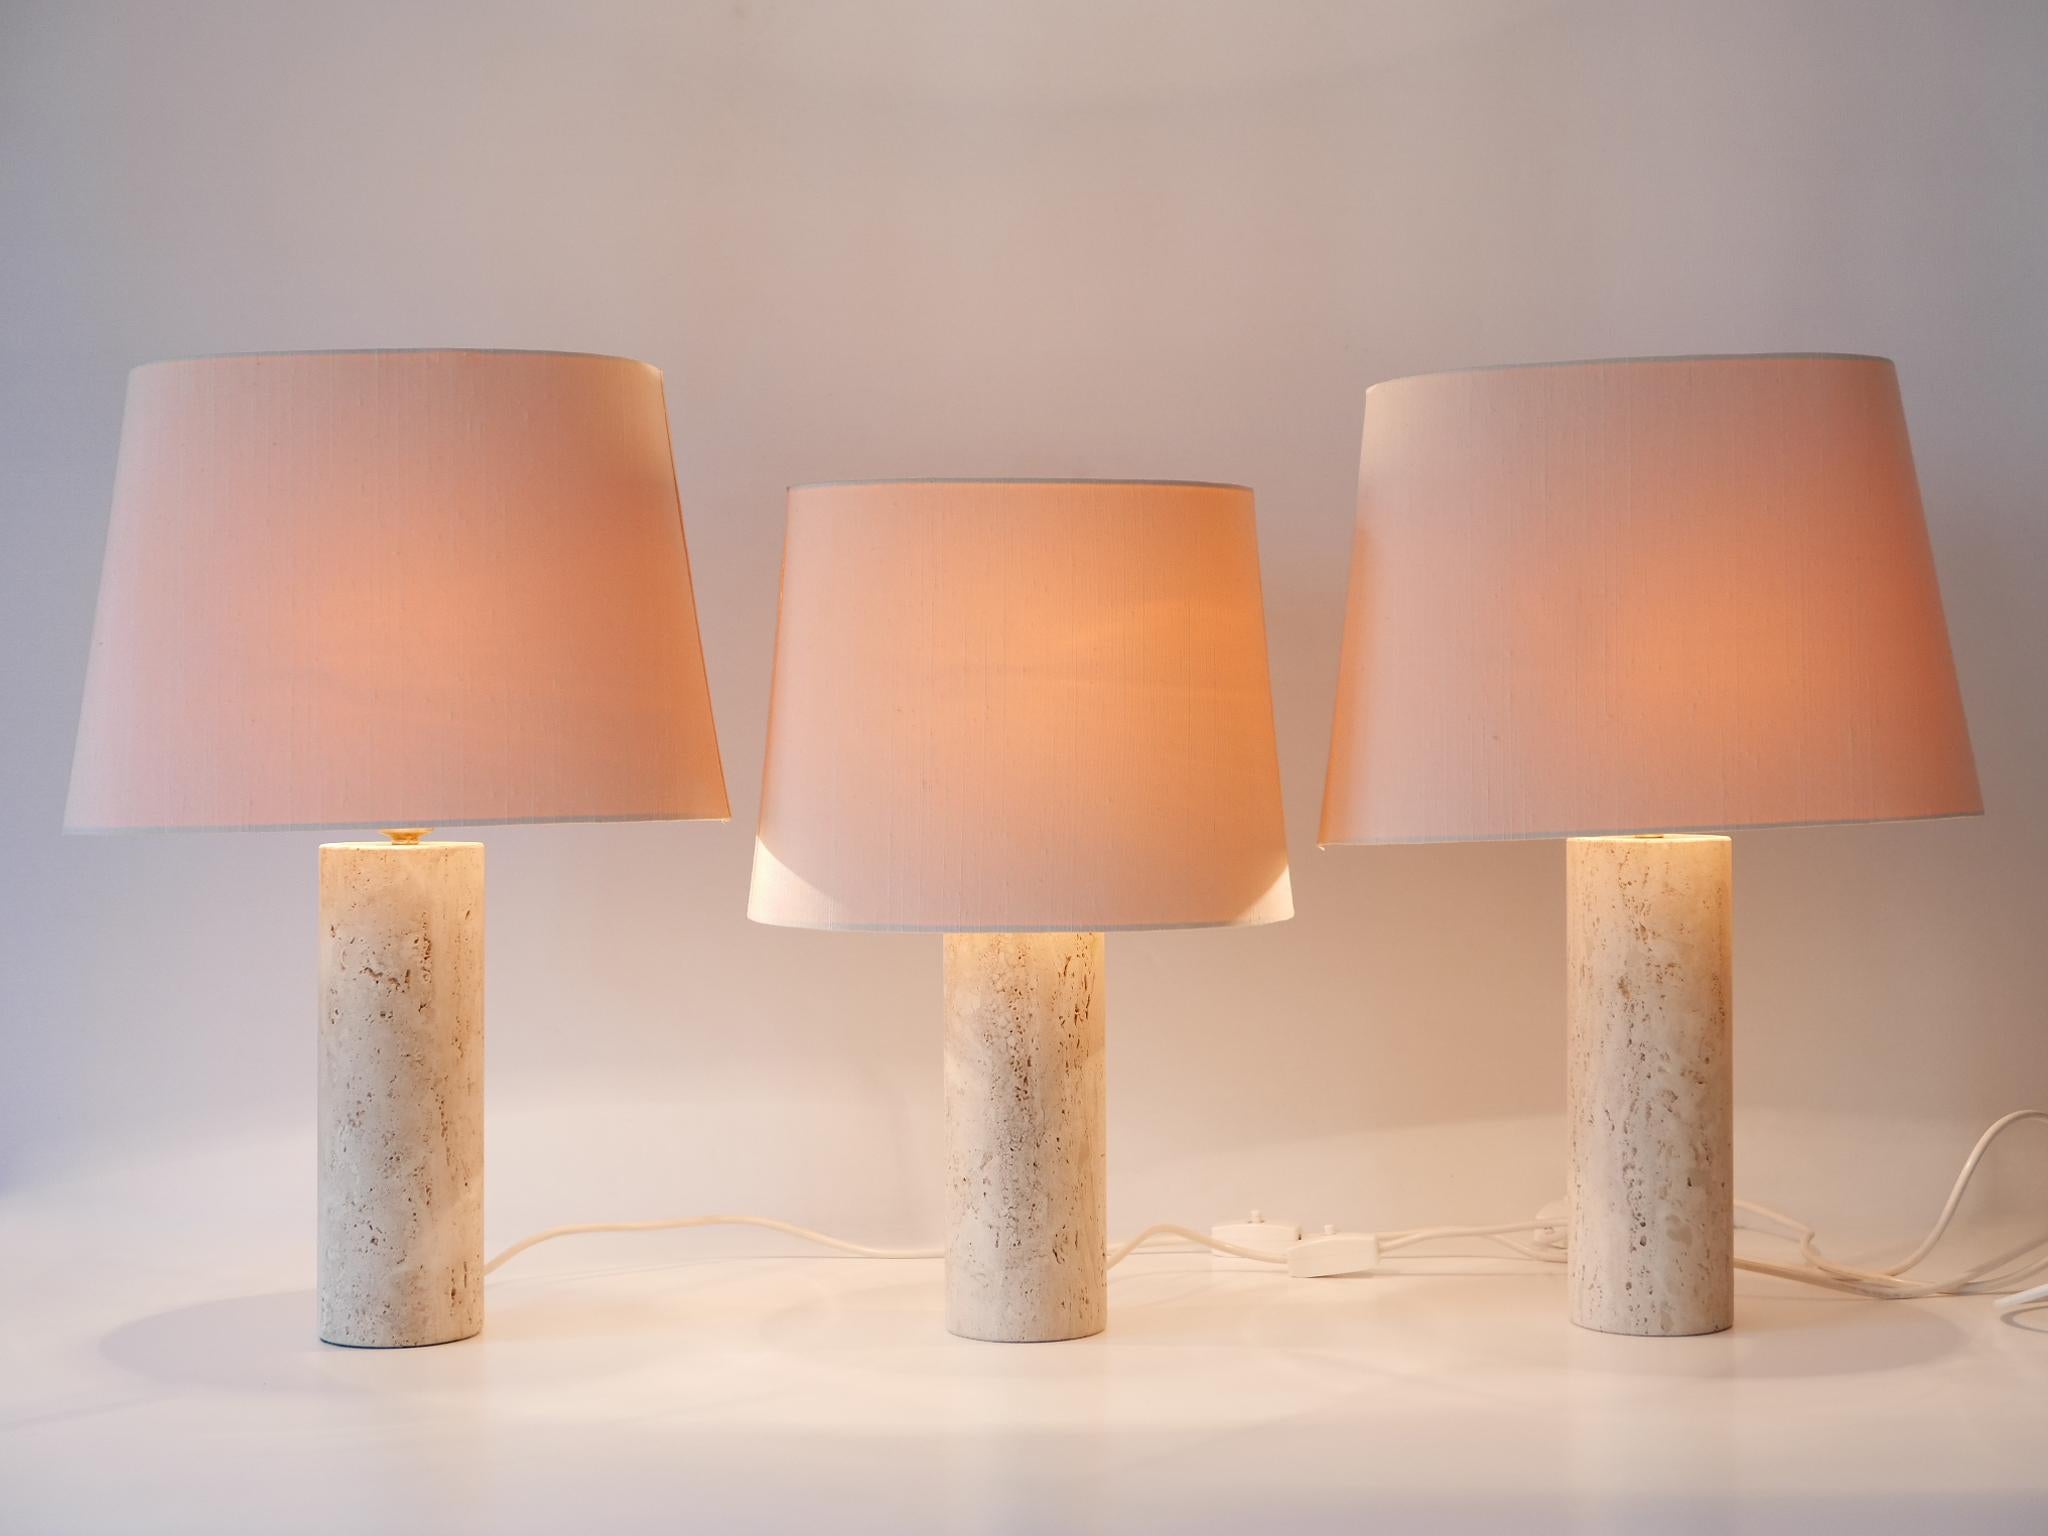 Set of three elegant Mid-Century Modern table lamps or bedside table lamps with travertine bases and fabric shades in silk. Designed and manufactured in Italy, 1960s.

Executed in travertine and silk shades, each table lamp comes with 1 x E27 / E26